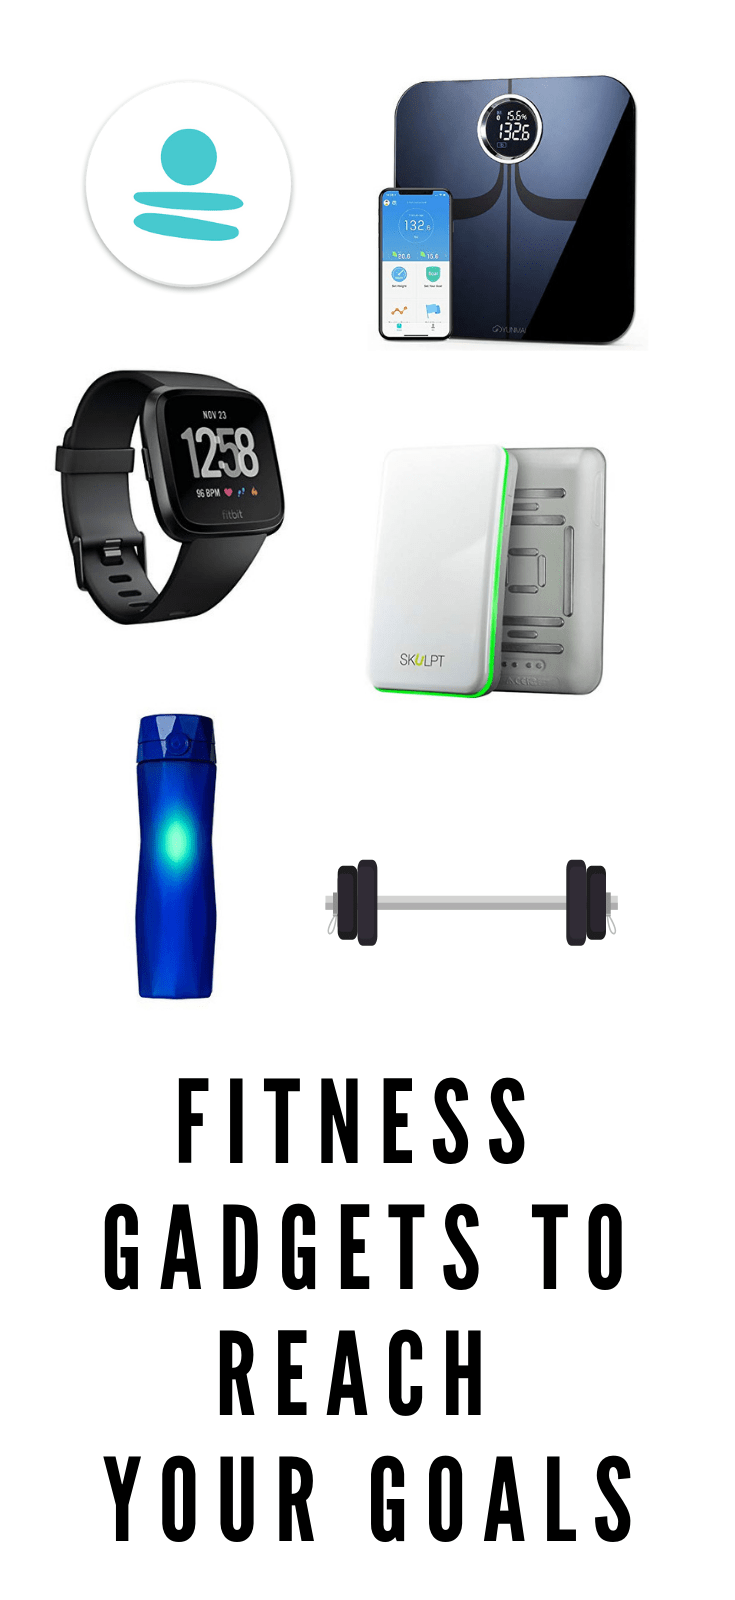 Fitness gadgets to stay on top of your goals